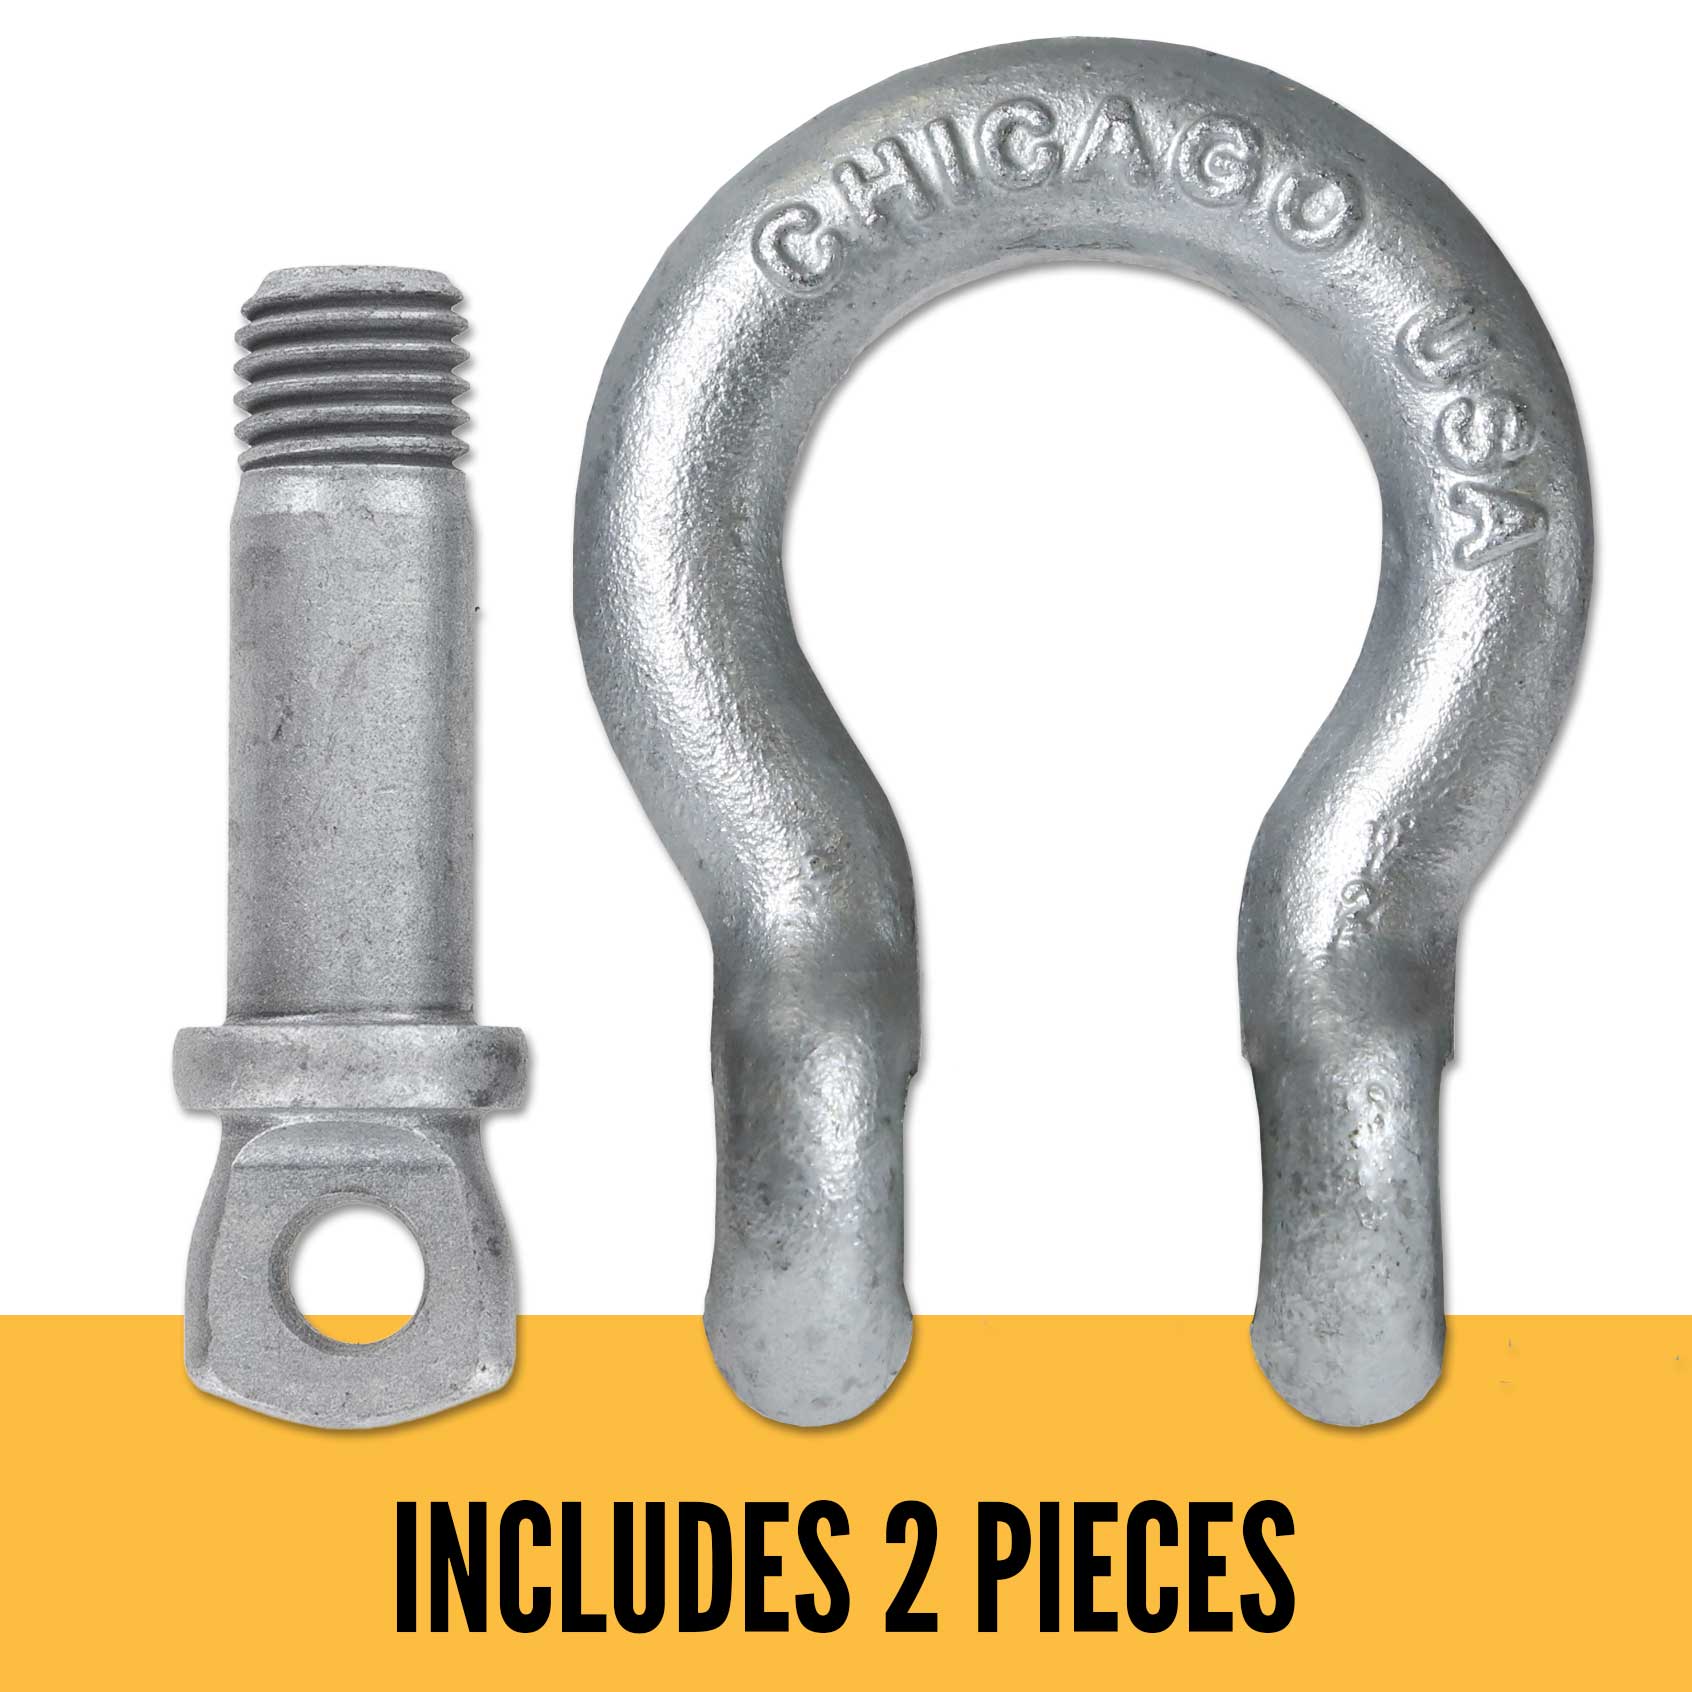 Screw Pin Anchor Shackle - Chicago Hardware - 1-3/8" Galvanized Steel - 13.5 Ton parts of a shackle